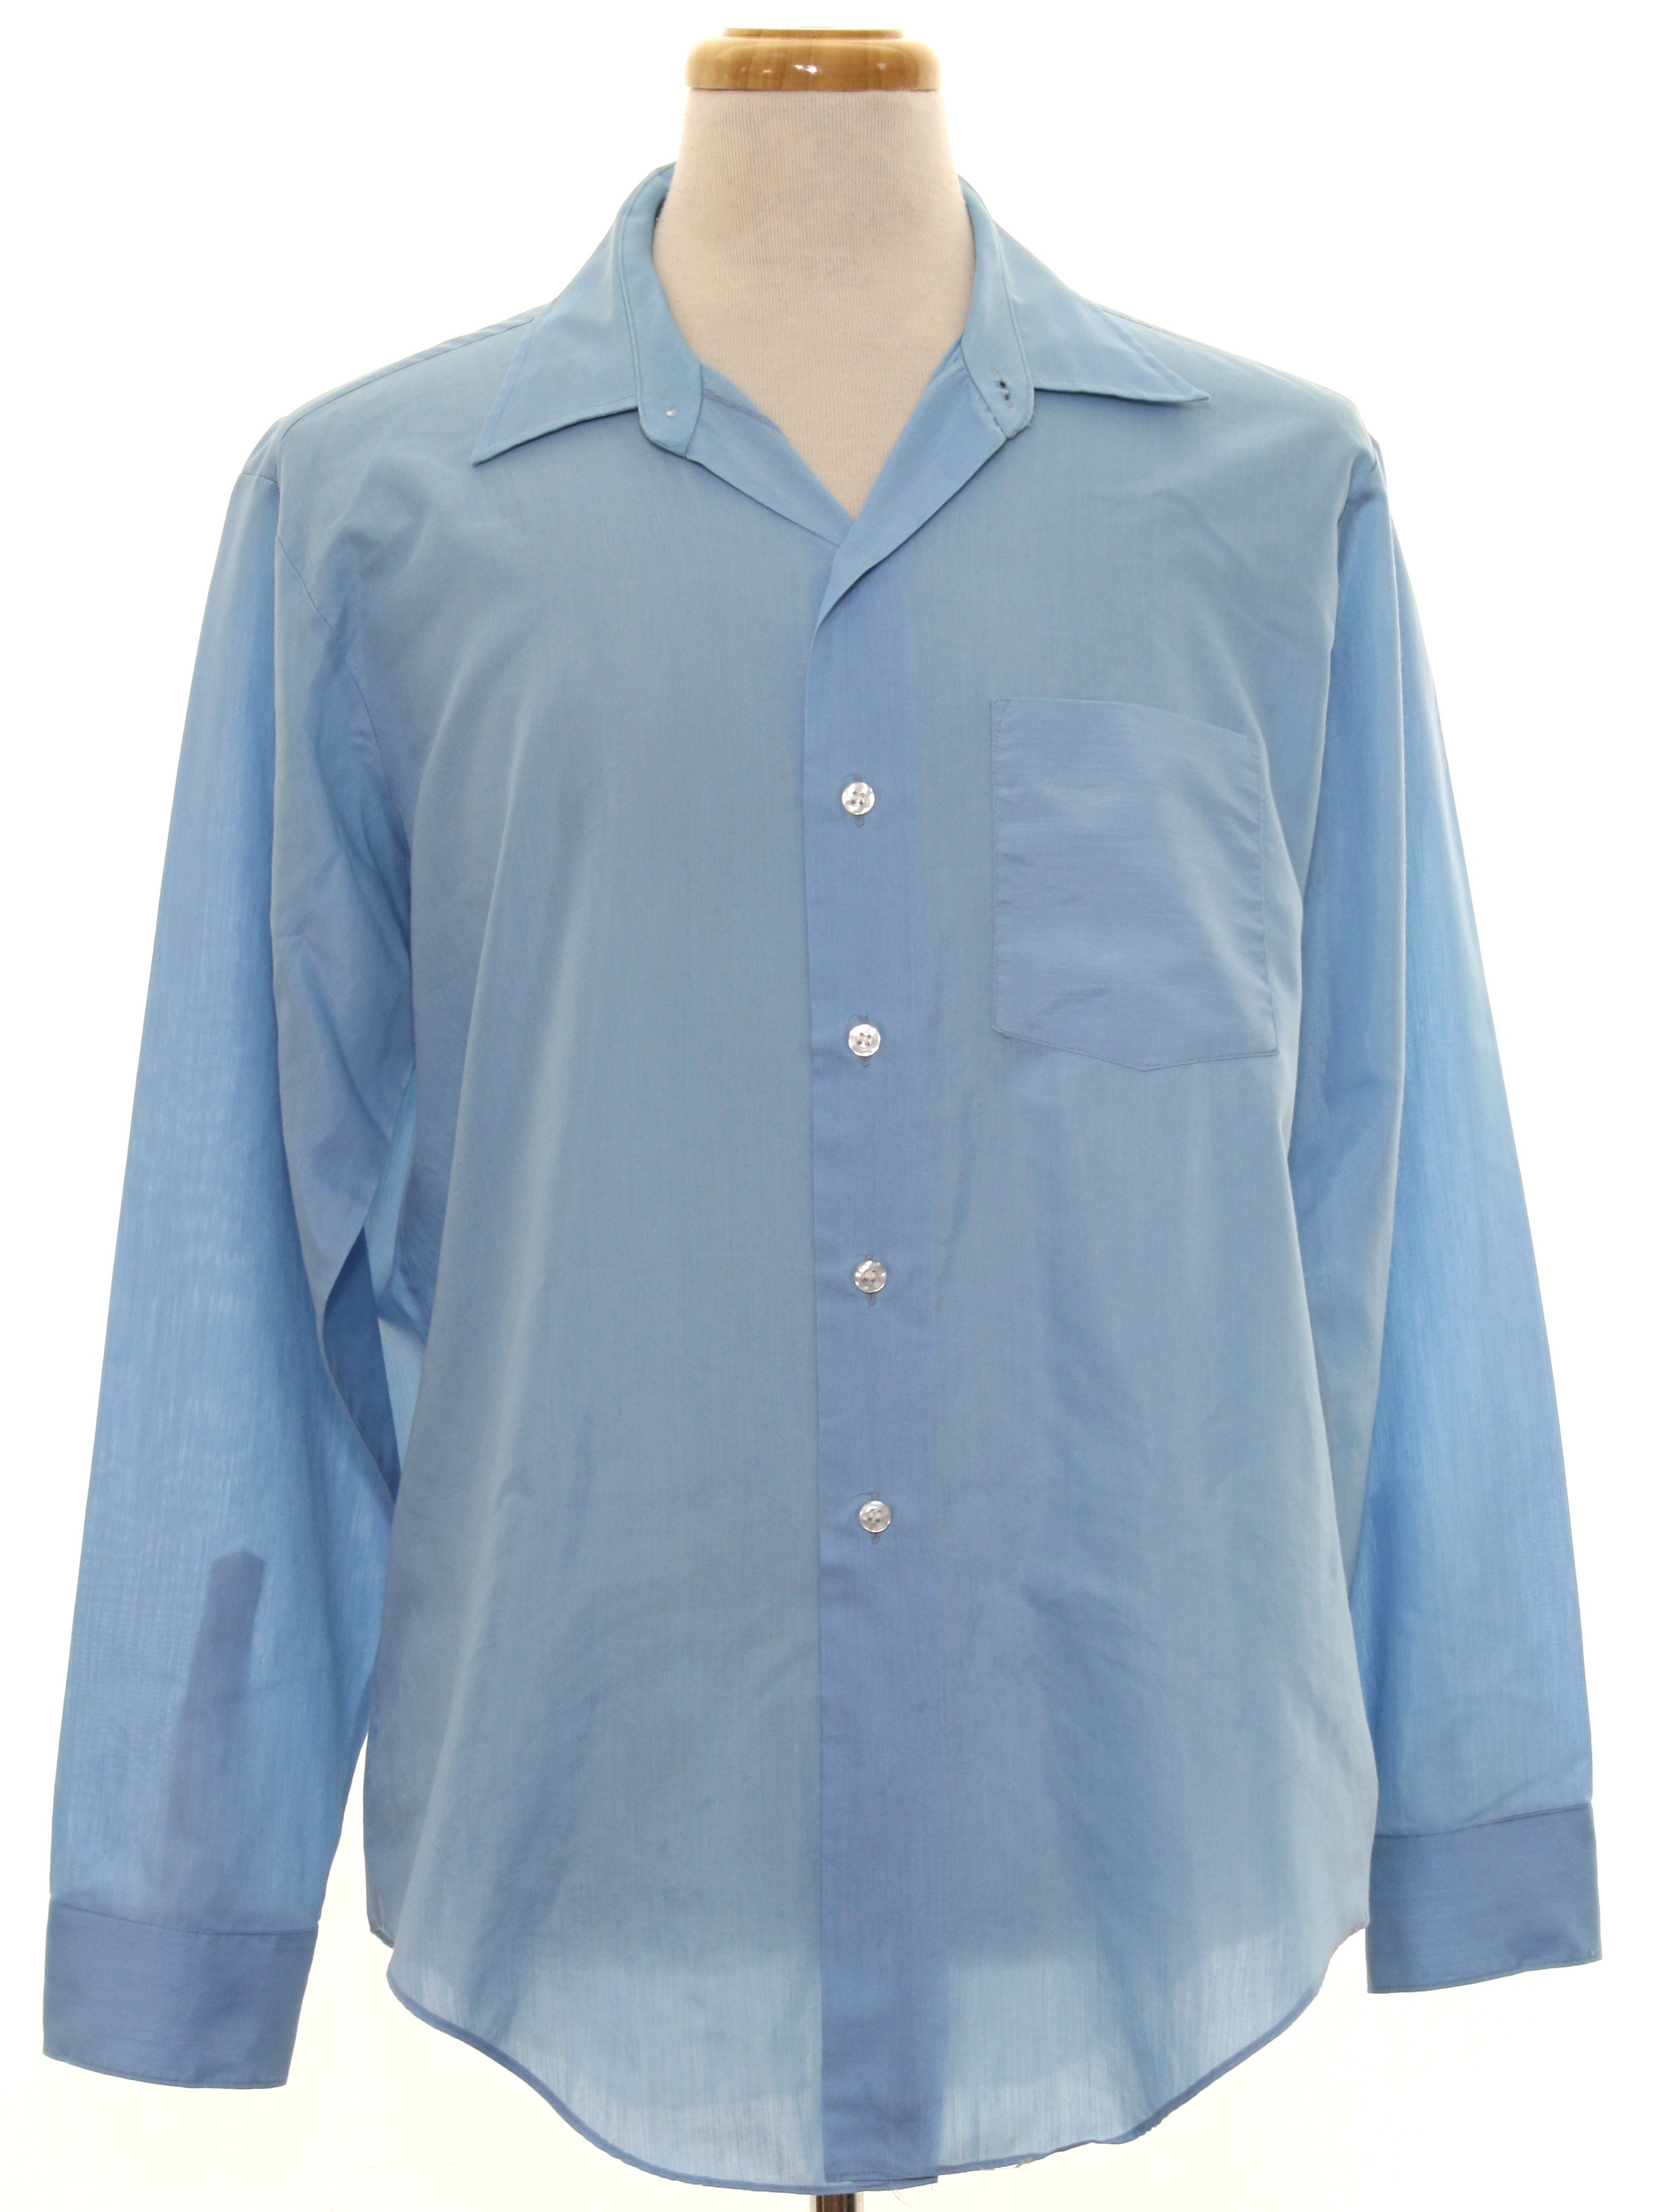 Vintage Topps 60's Shirt: Late 60s or early 70s -Topps- Mens sky blue ...